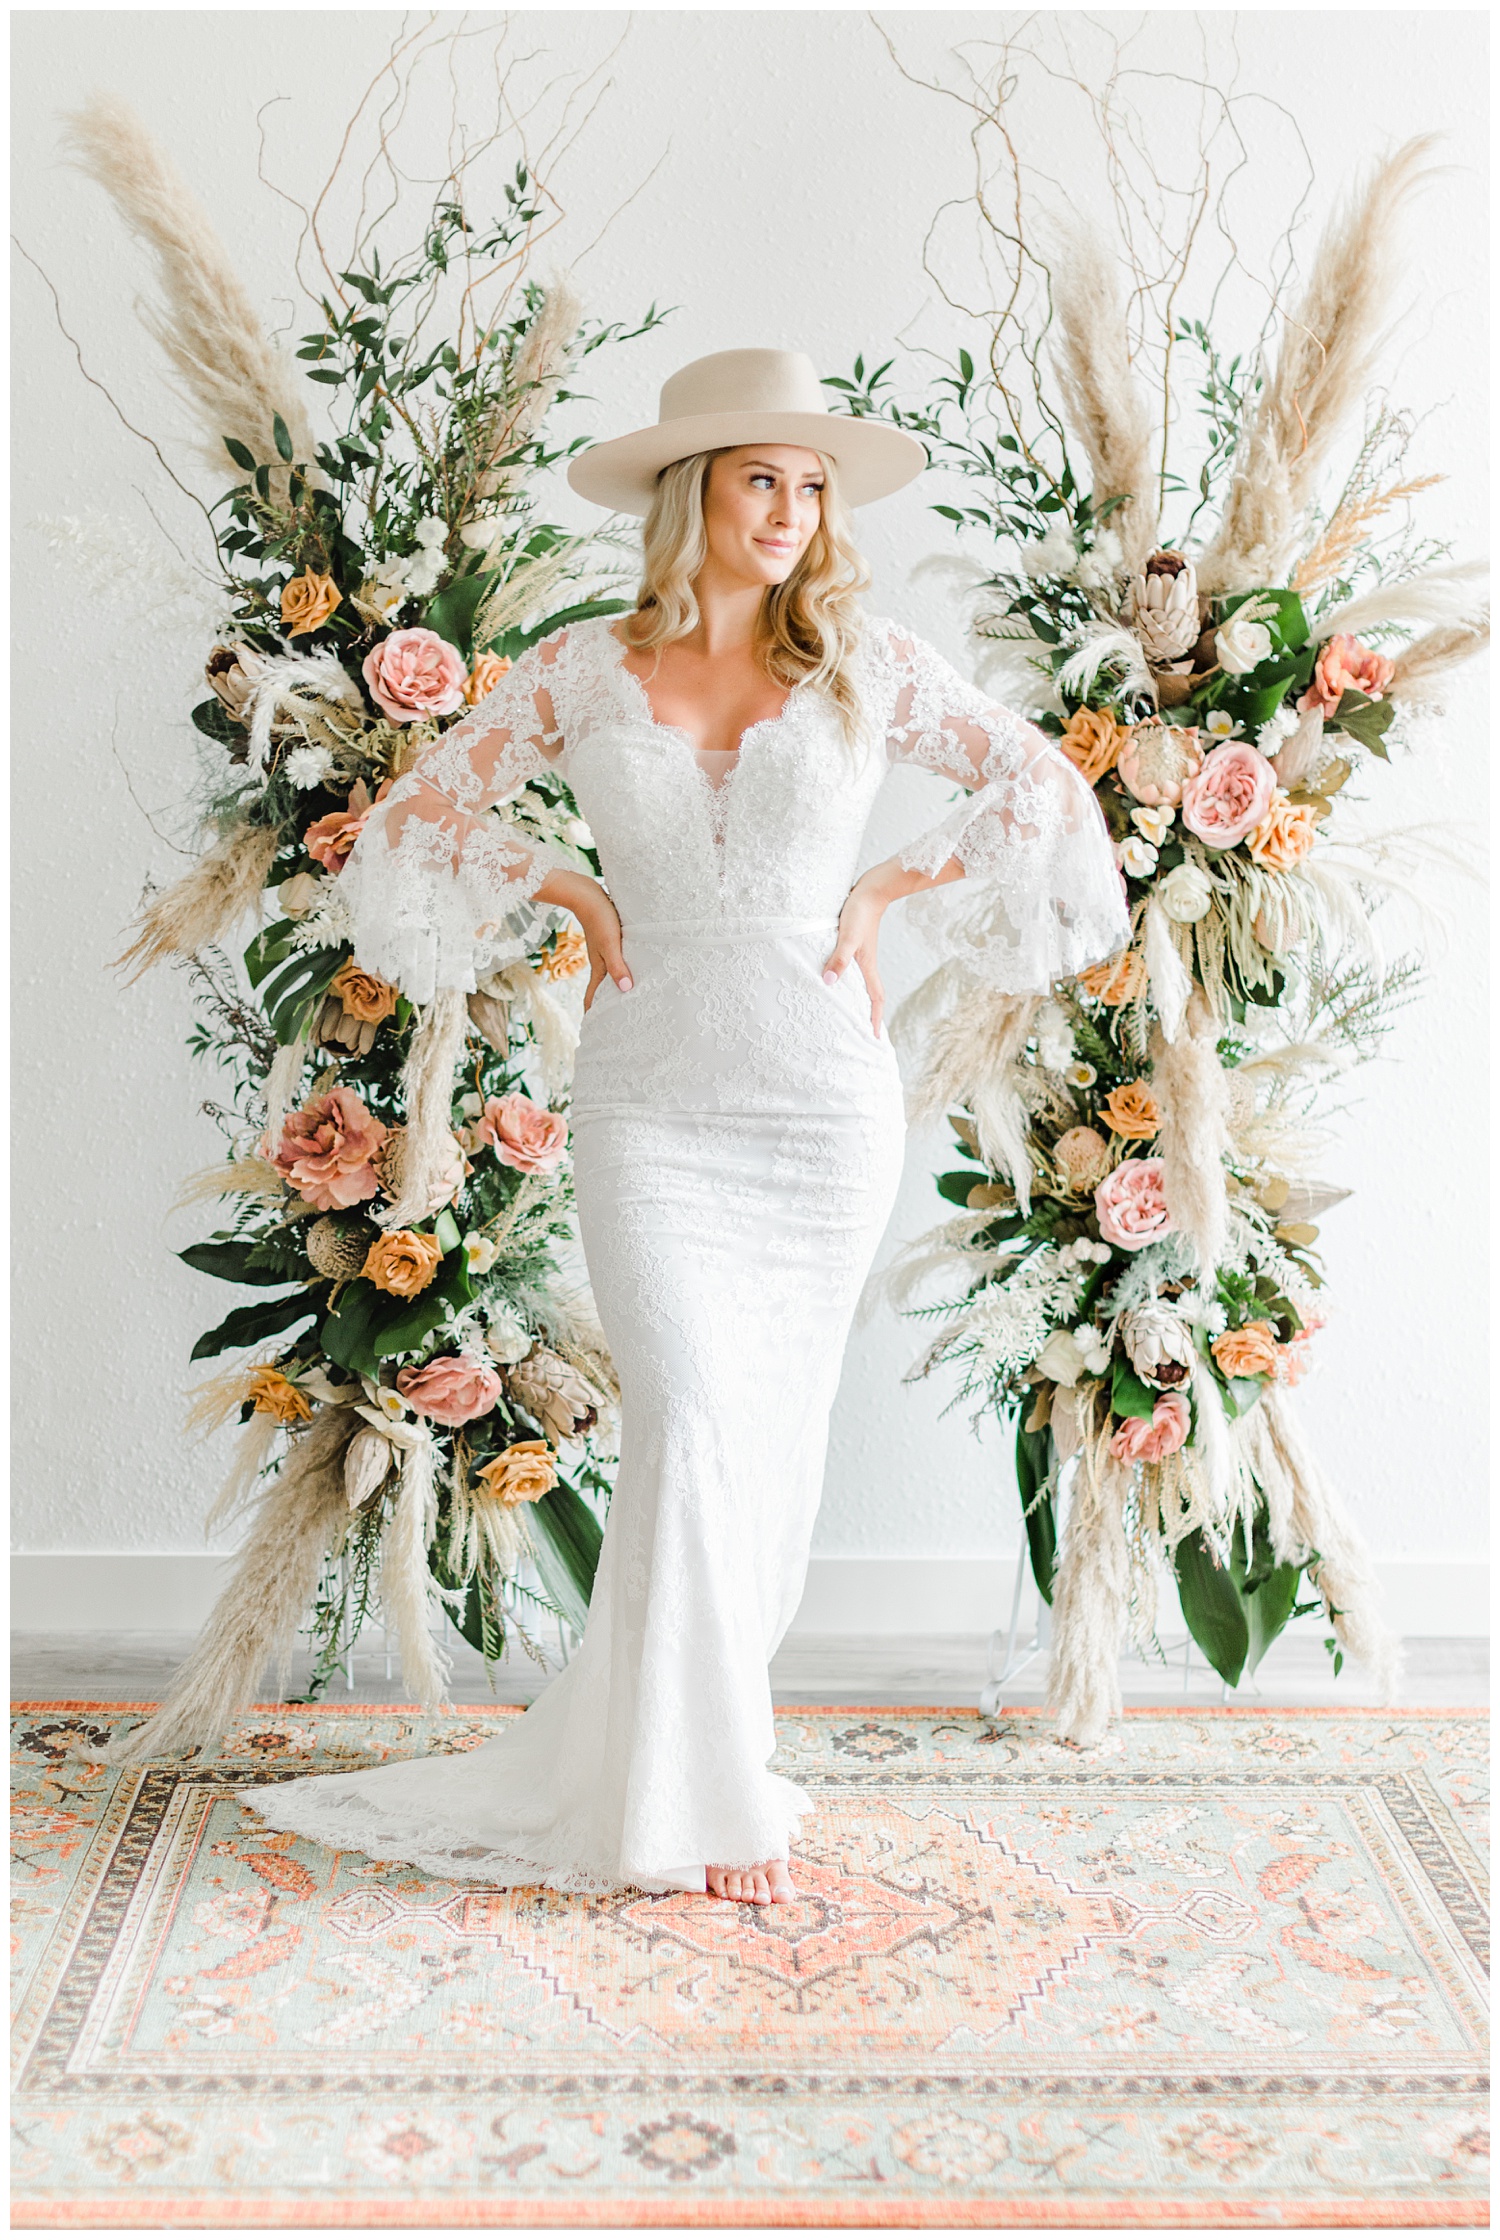 Beautiful bride, Kyarsten, wearing a boho style Casablanca gown with lace elbow poet sleeves and a Gigi Pip hat | CB Studio